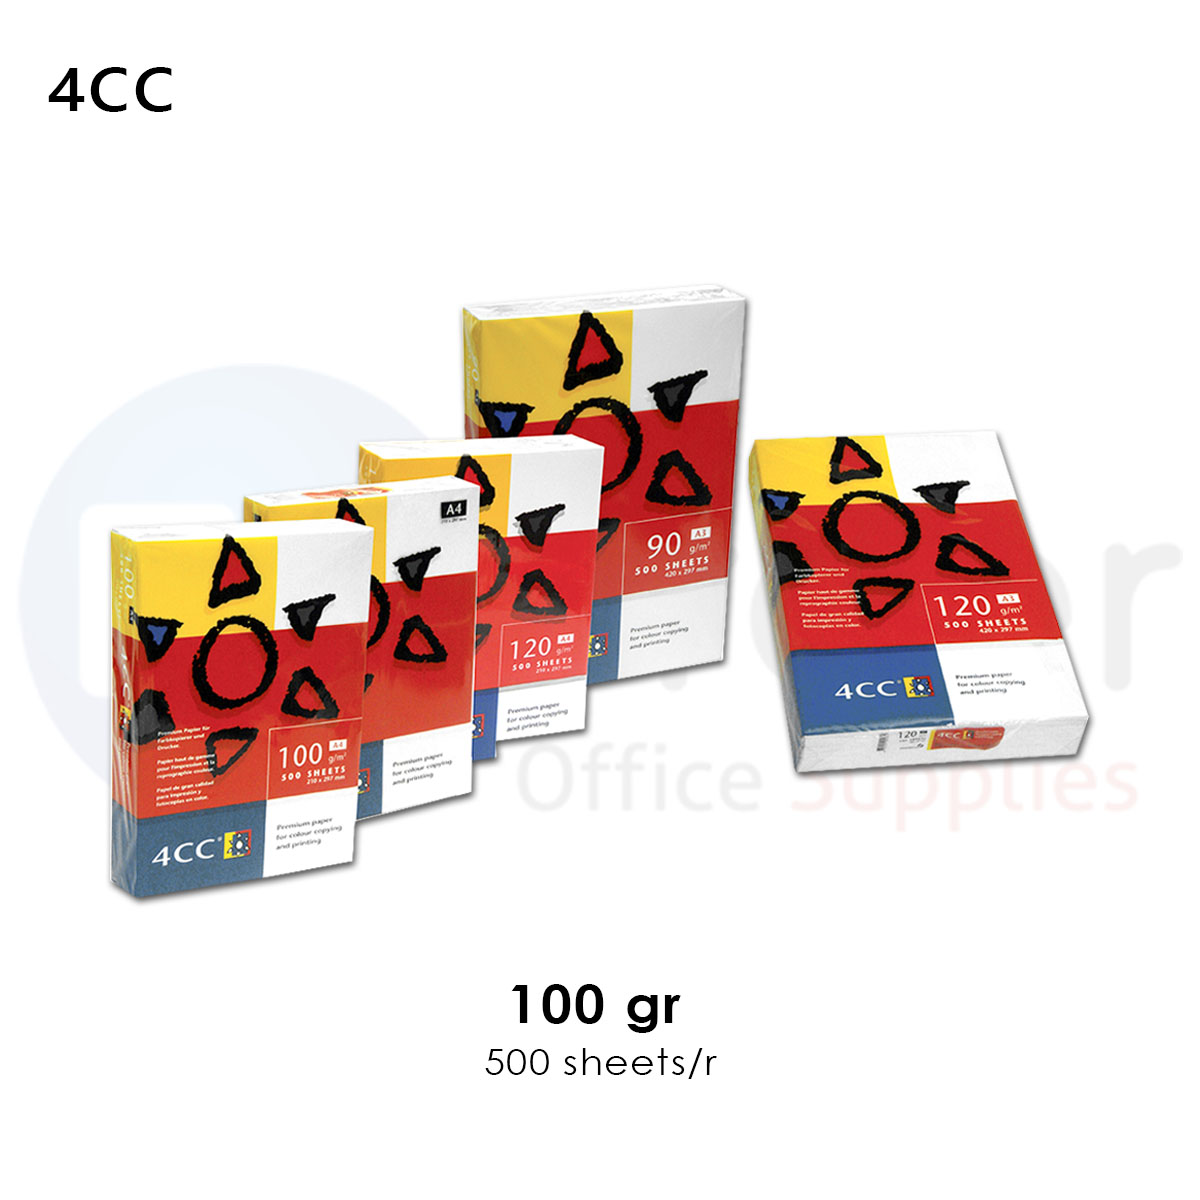 *+PRO DESIGN  100gr. A4 paper 500/sheet, Coated paper high quality